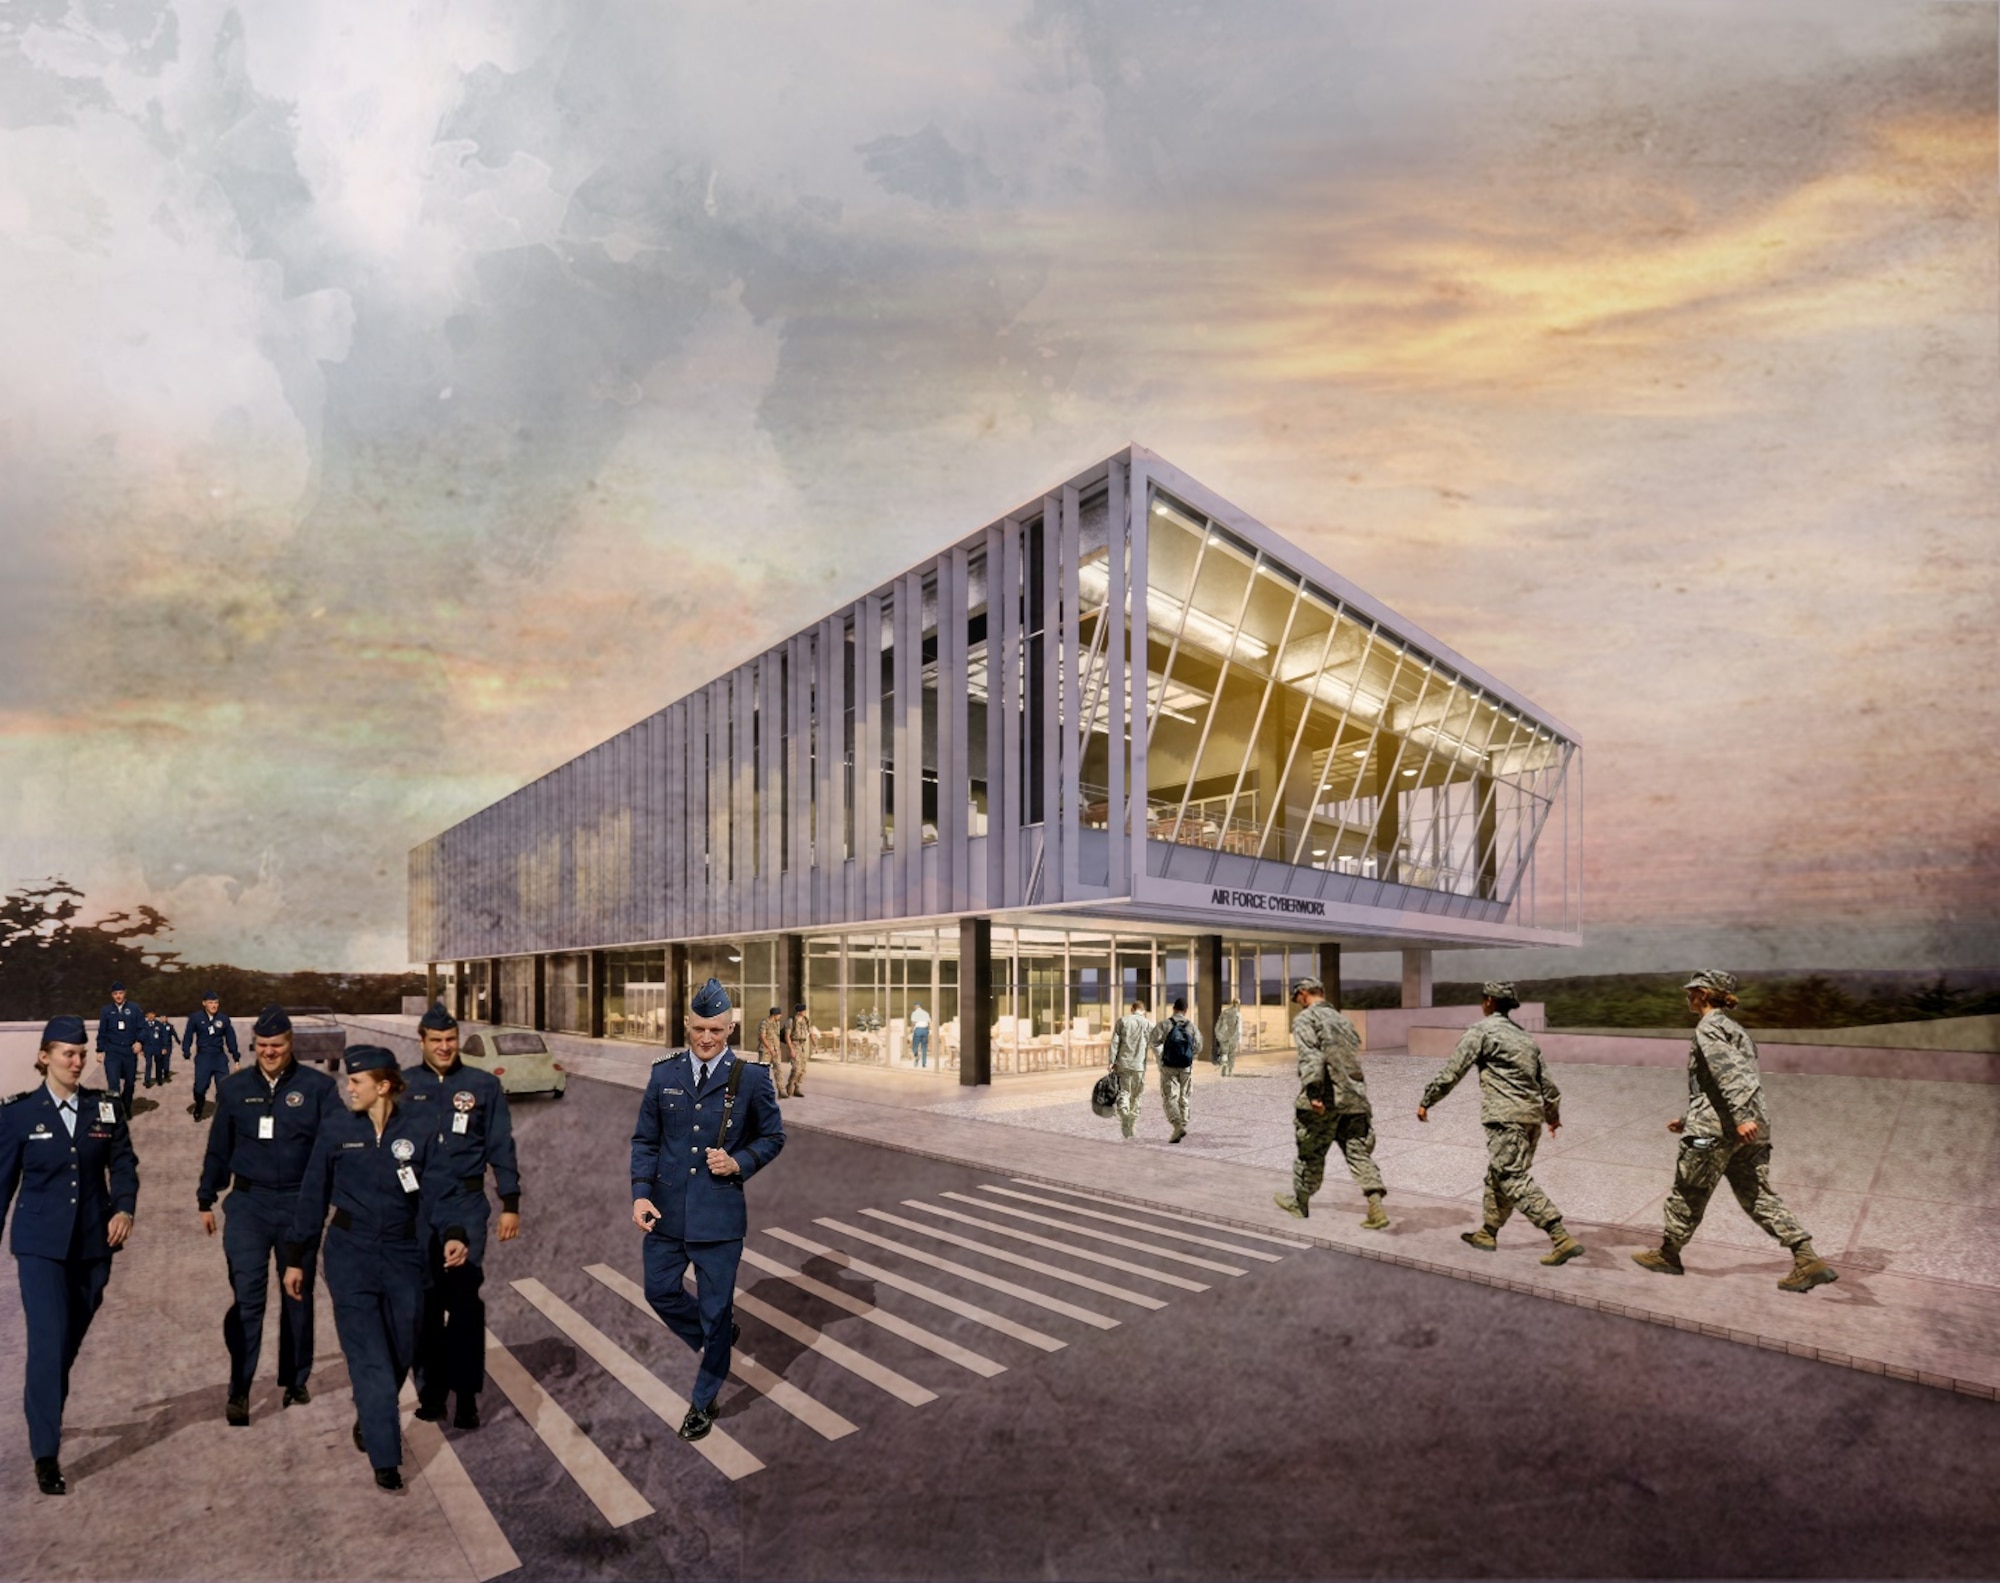 The Air Force Civil Engineer Center is designing and constructing a $30 Million, 33,000-square-foot facility at the U.S. Air Force Academy to train the next generation of cyber warriors.